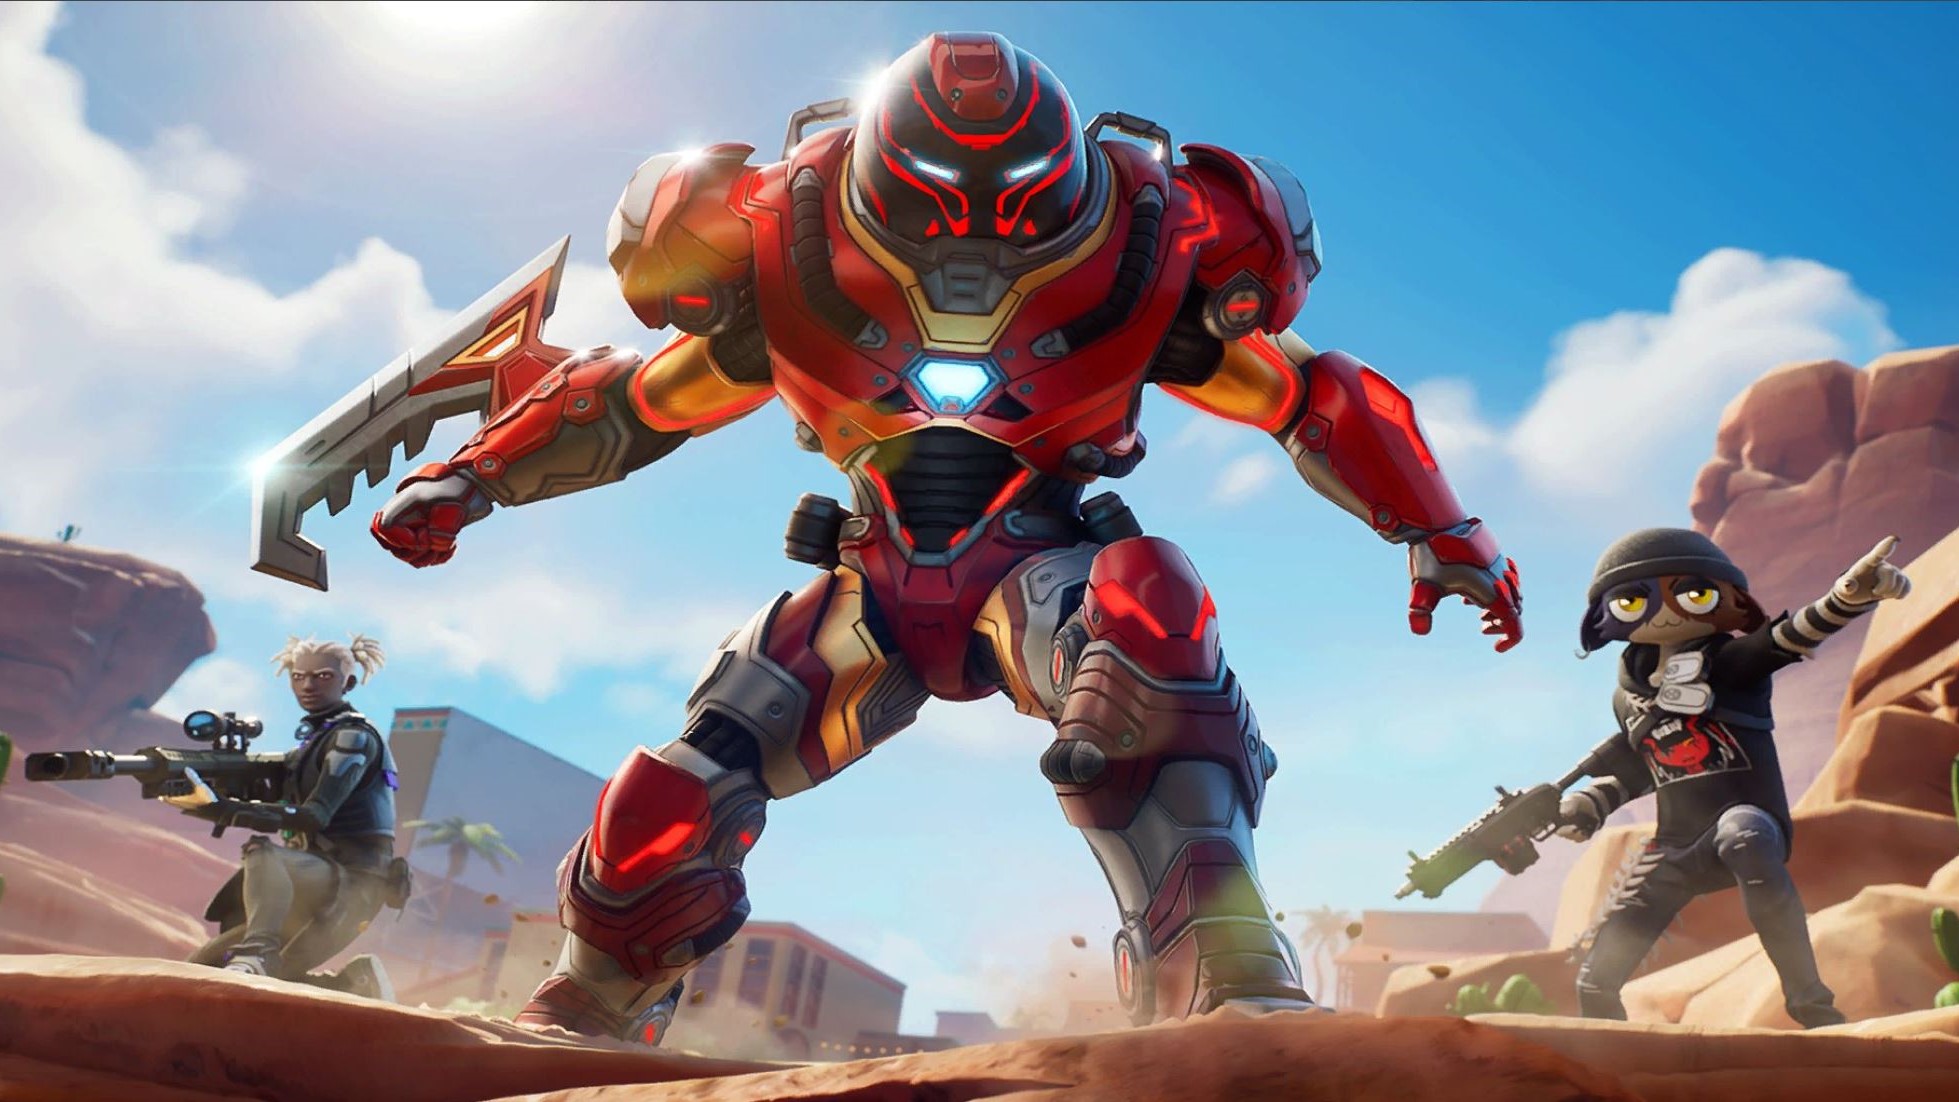 Join Marvel Unlimited and Get Bonus In-Game Fortnite Items